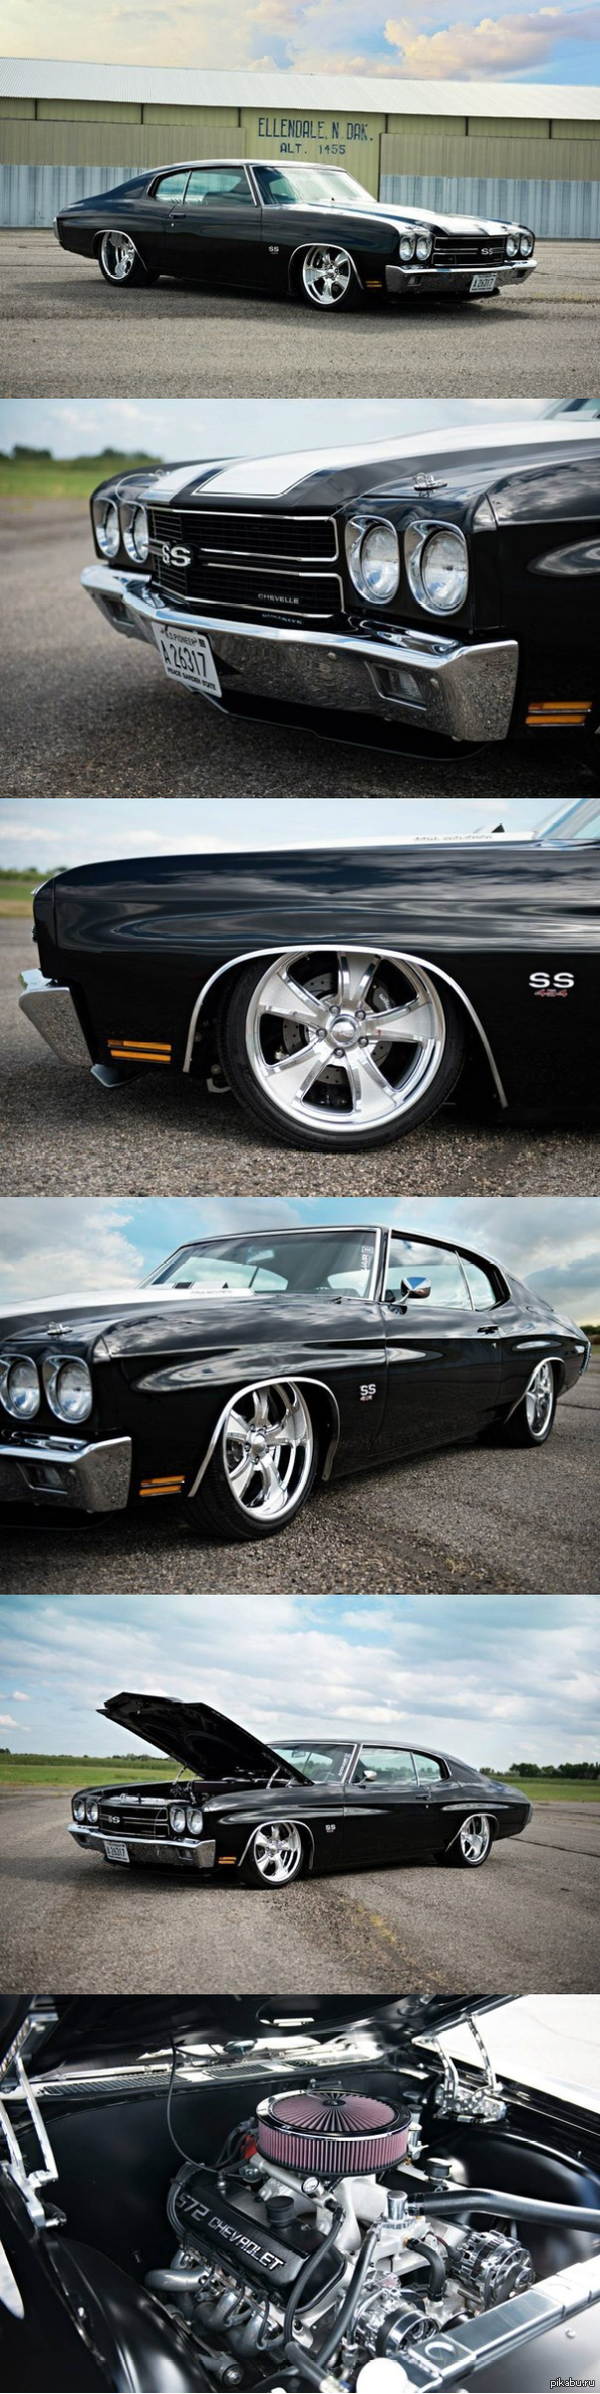 1970 Chevrolet Chevelle SS Pro Touring       )